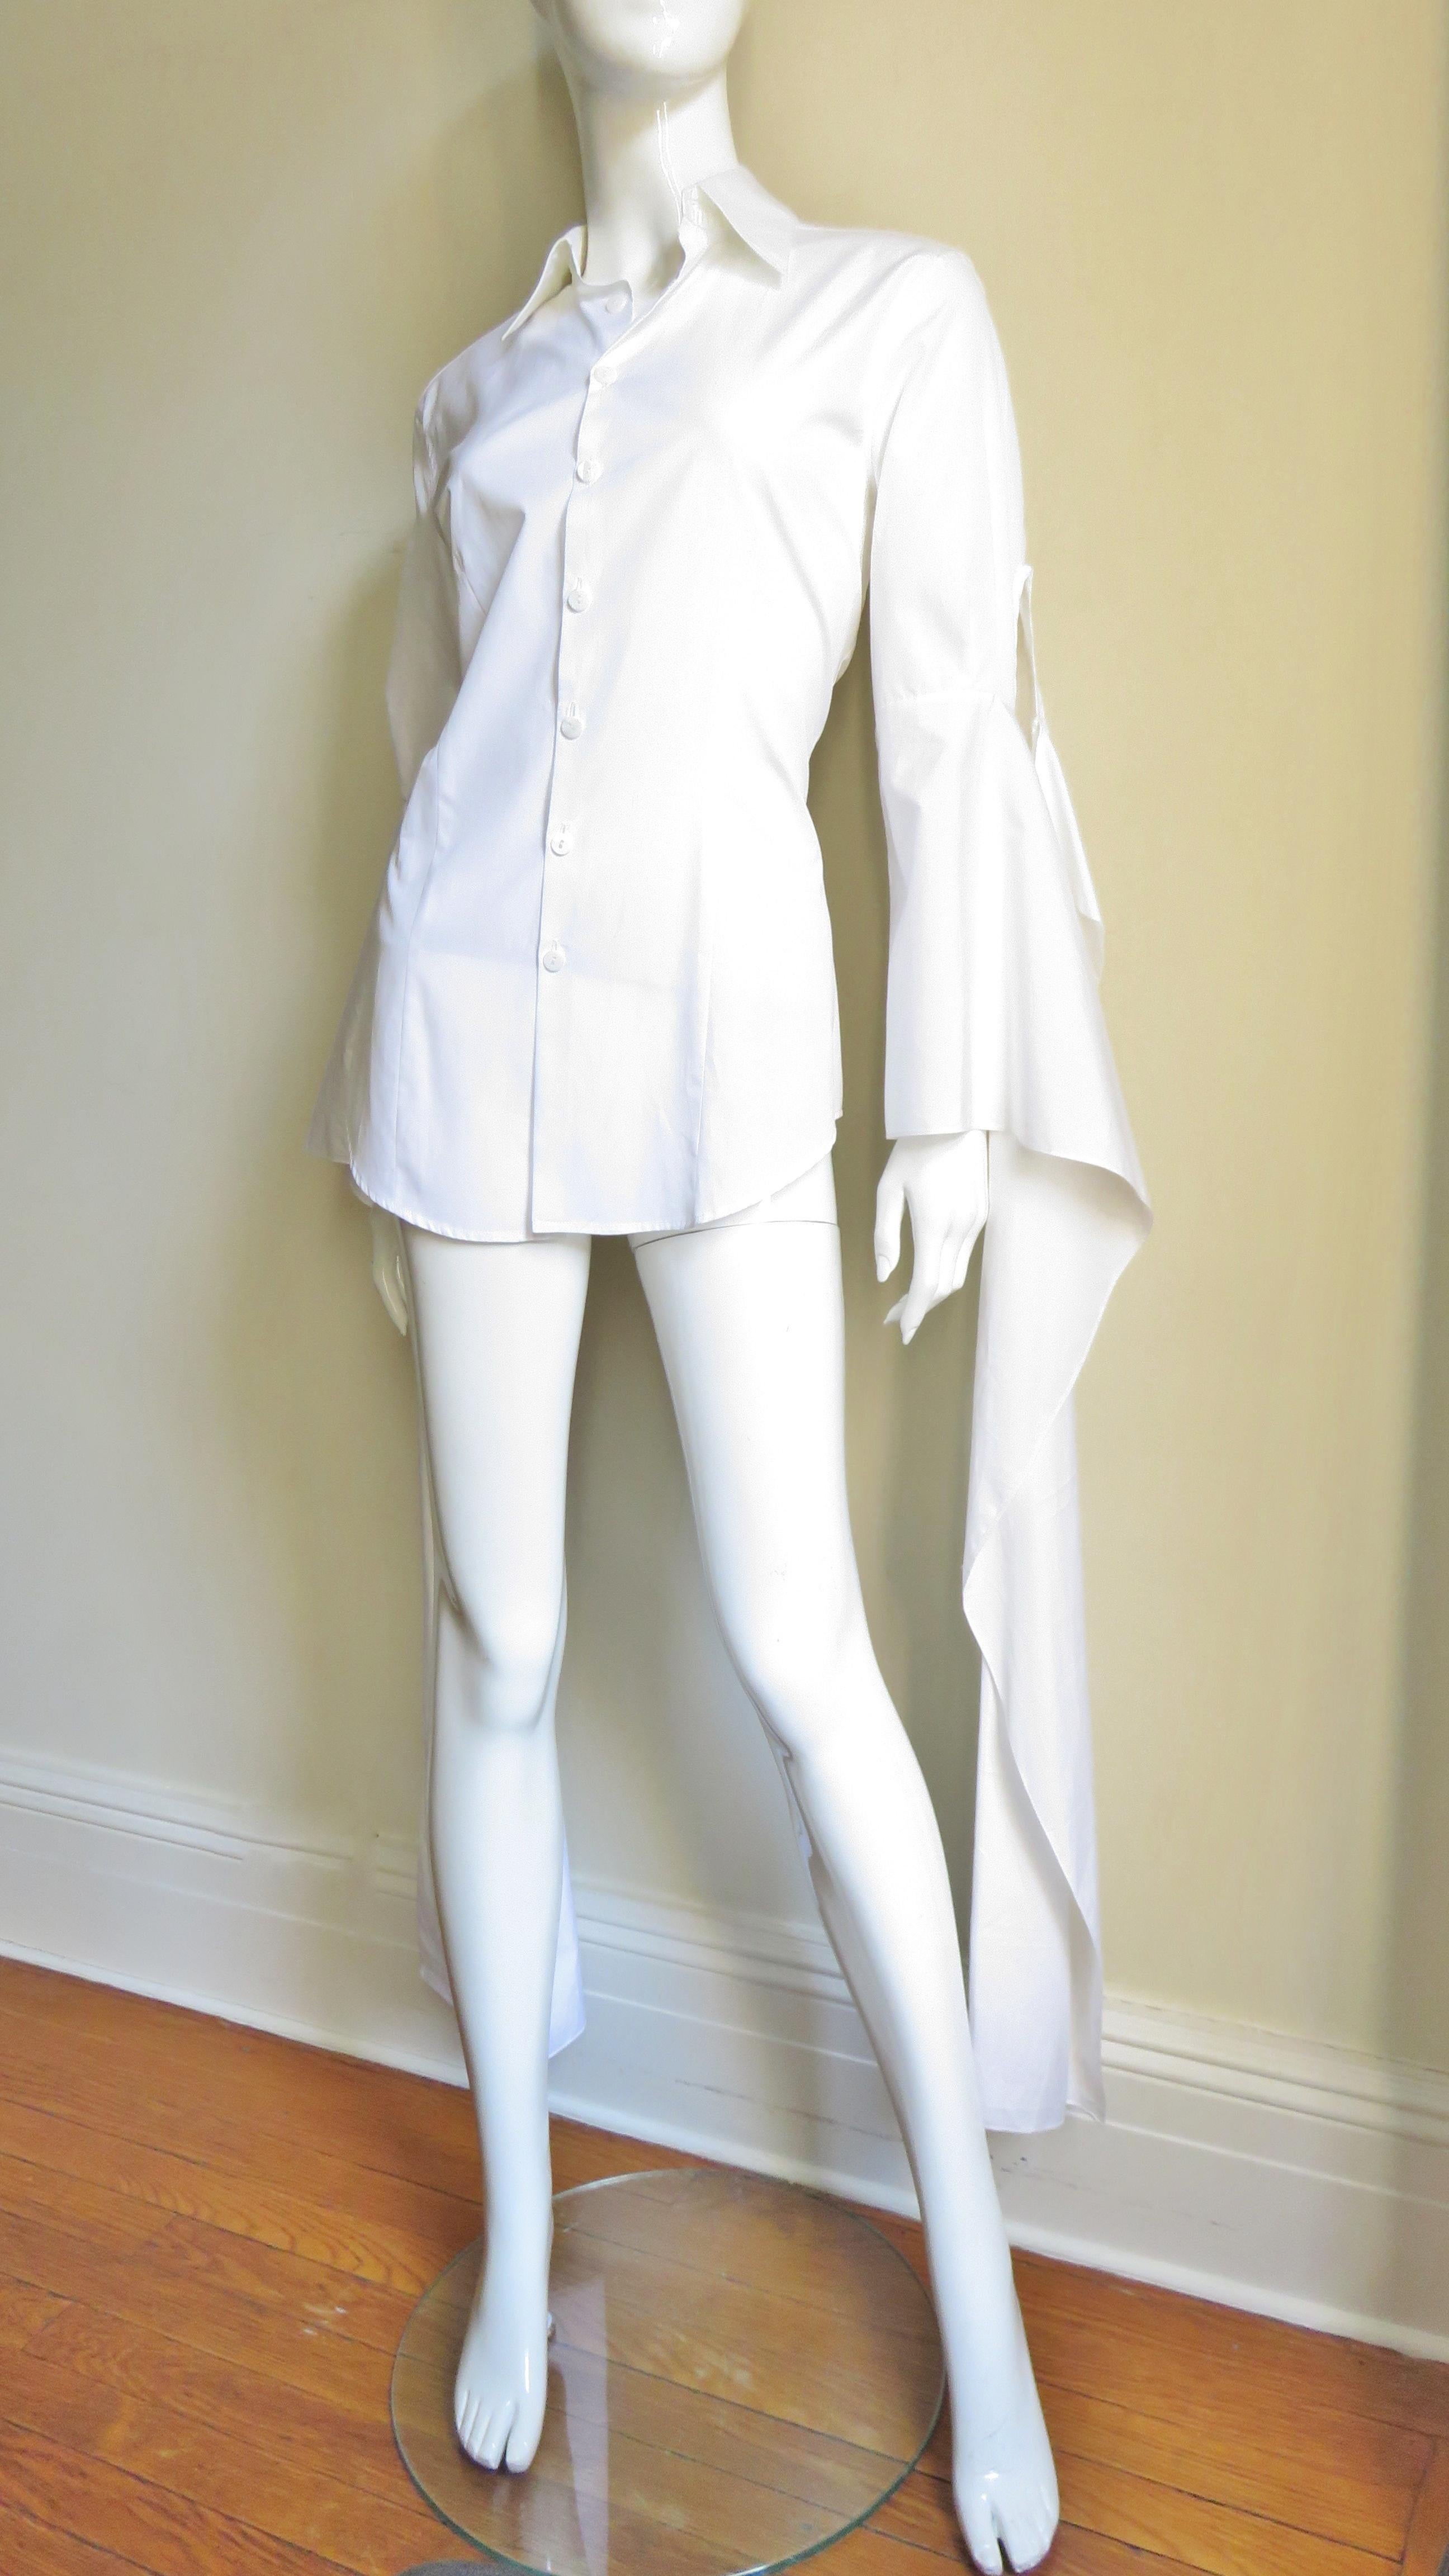 Jean Paul Gaultier New Shirt with Drape Sleeves For Sale 3